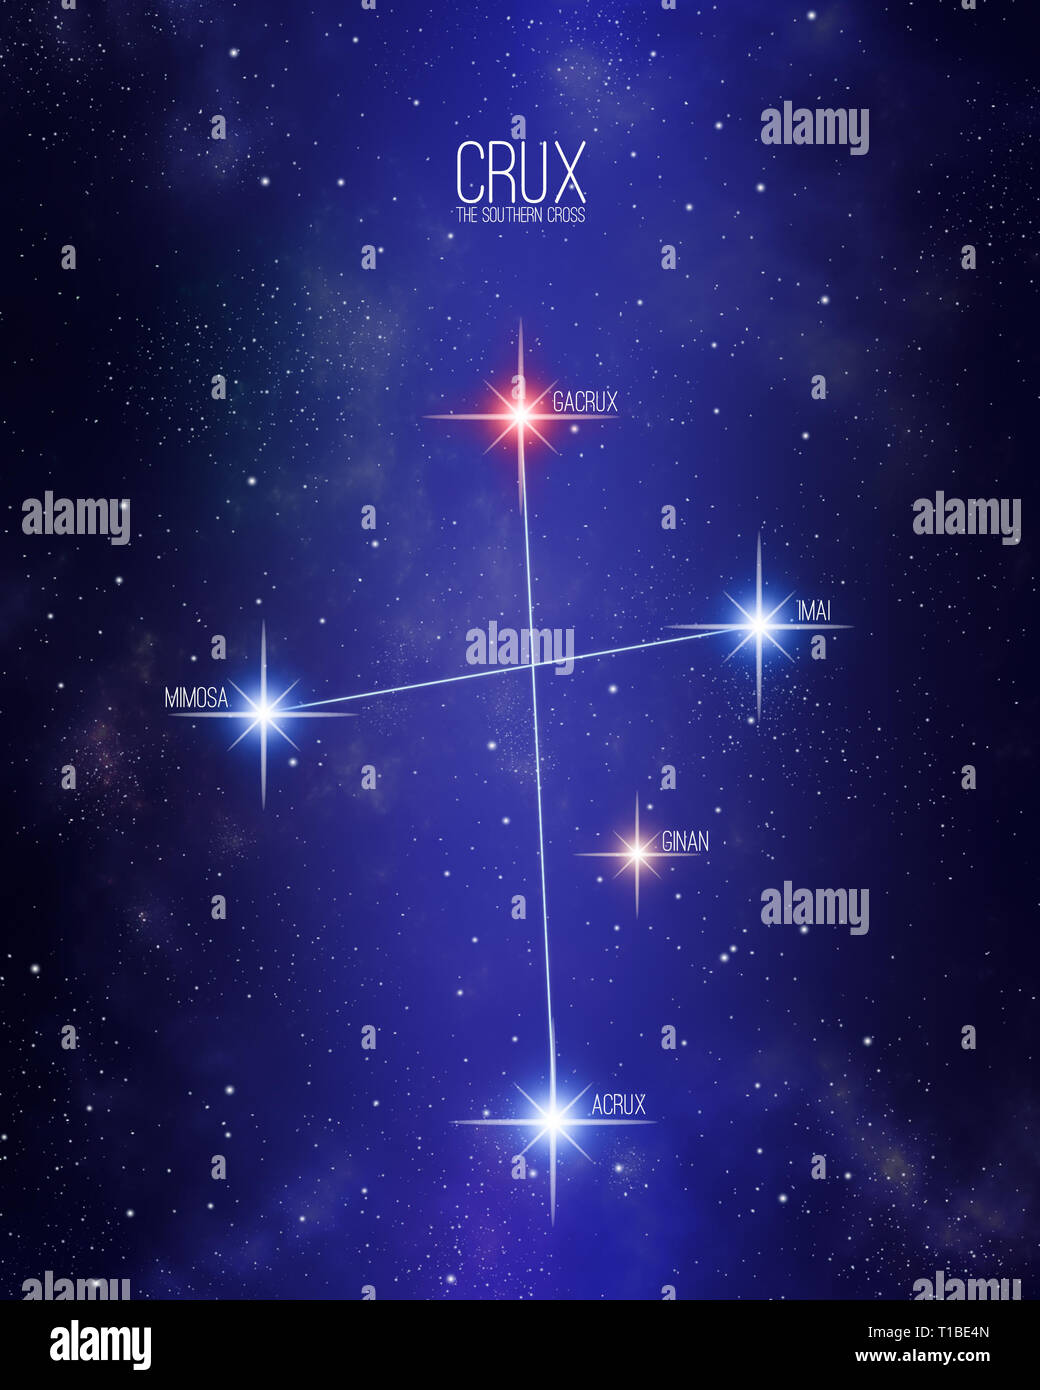 Becrux (Beta Crucis): Bright Star in the Southern Cross